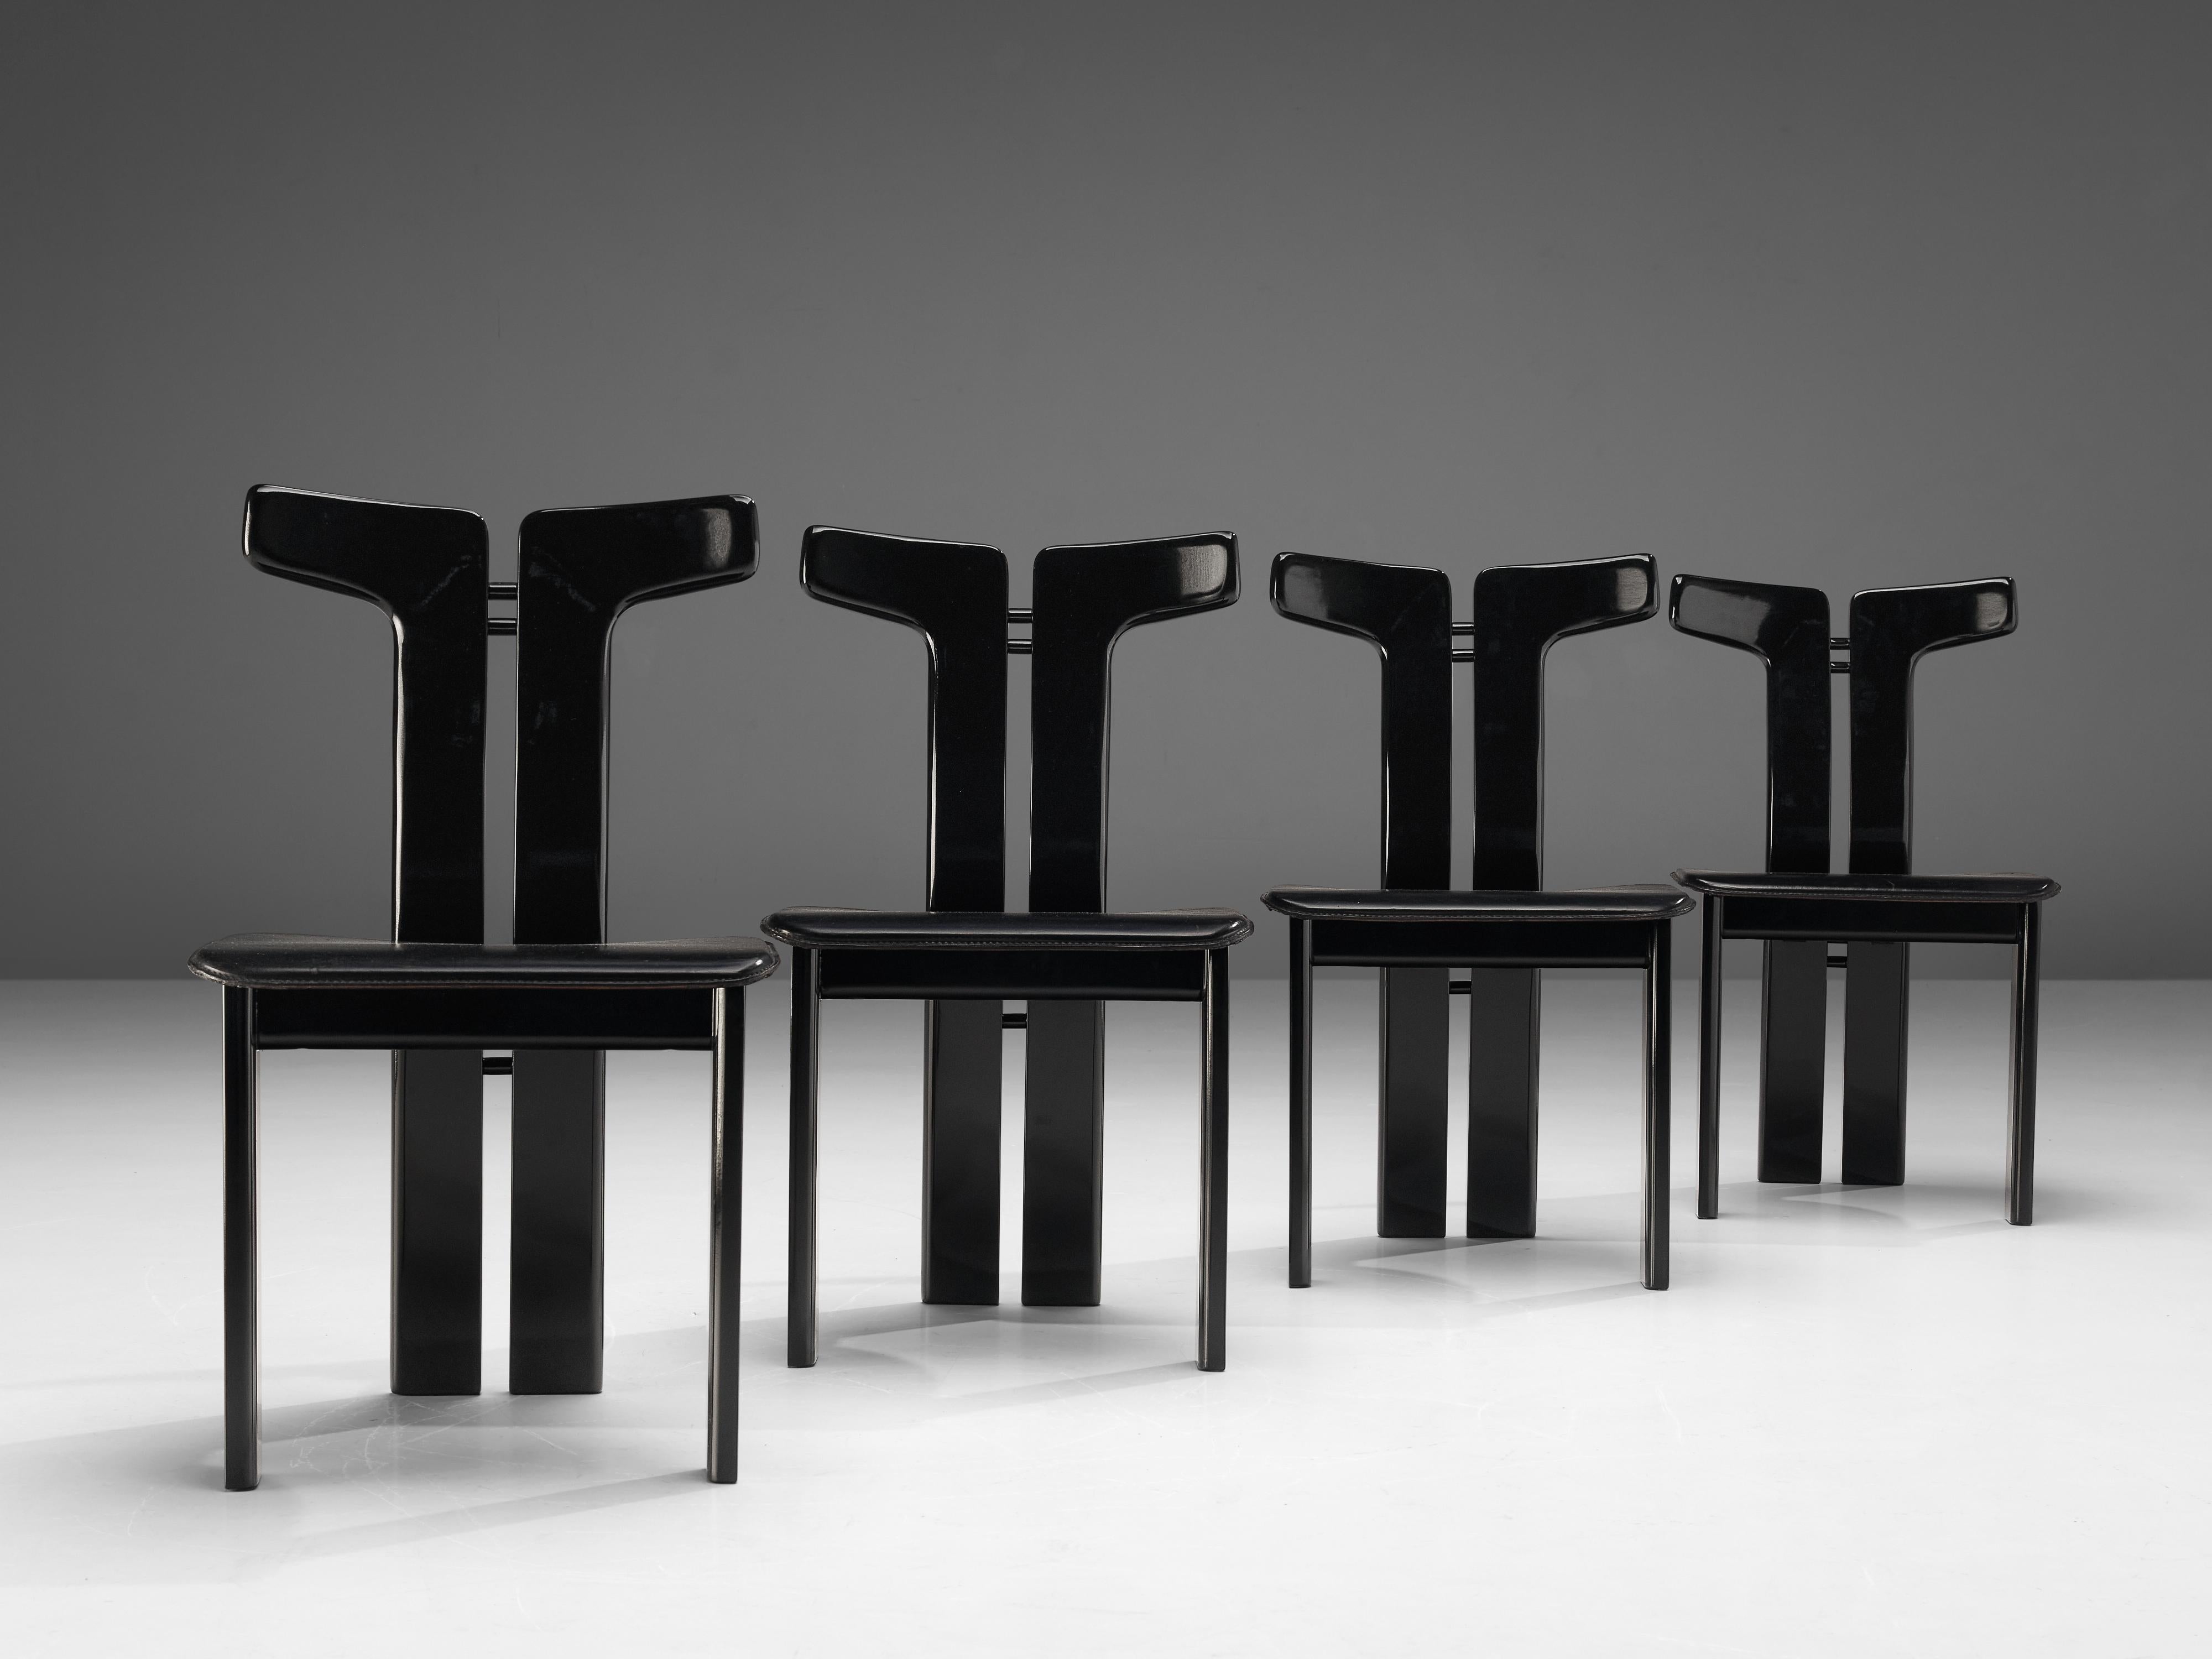 Pierre Cardin, dining chairs, lacquered wood, black leather, Italy, 1980s 

This set of sculptural chairs is designed by Pierre Cardin. The curved back highlights the qualities of the wood and its shape in an unparalleled manner. These organic